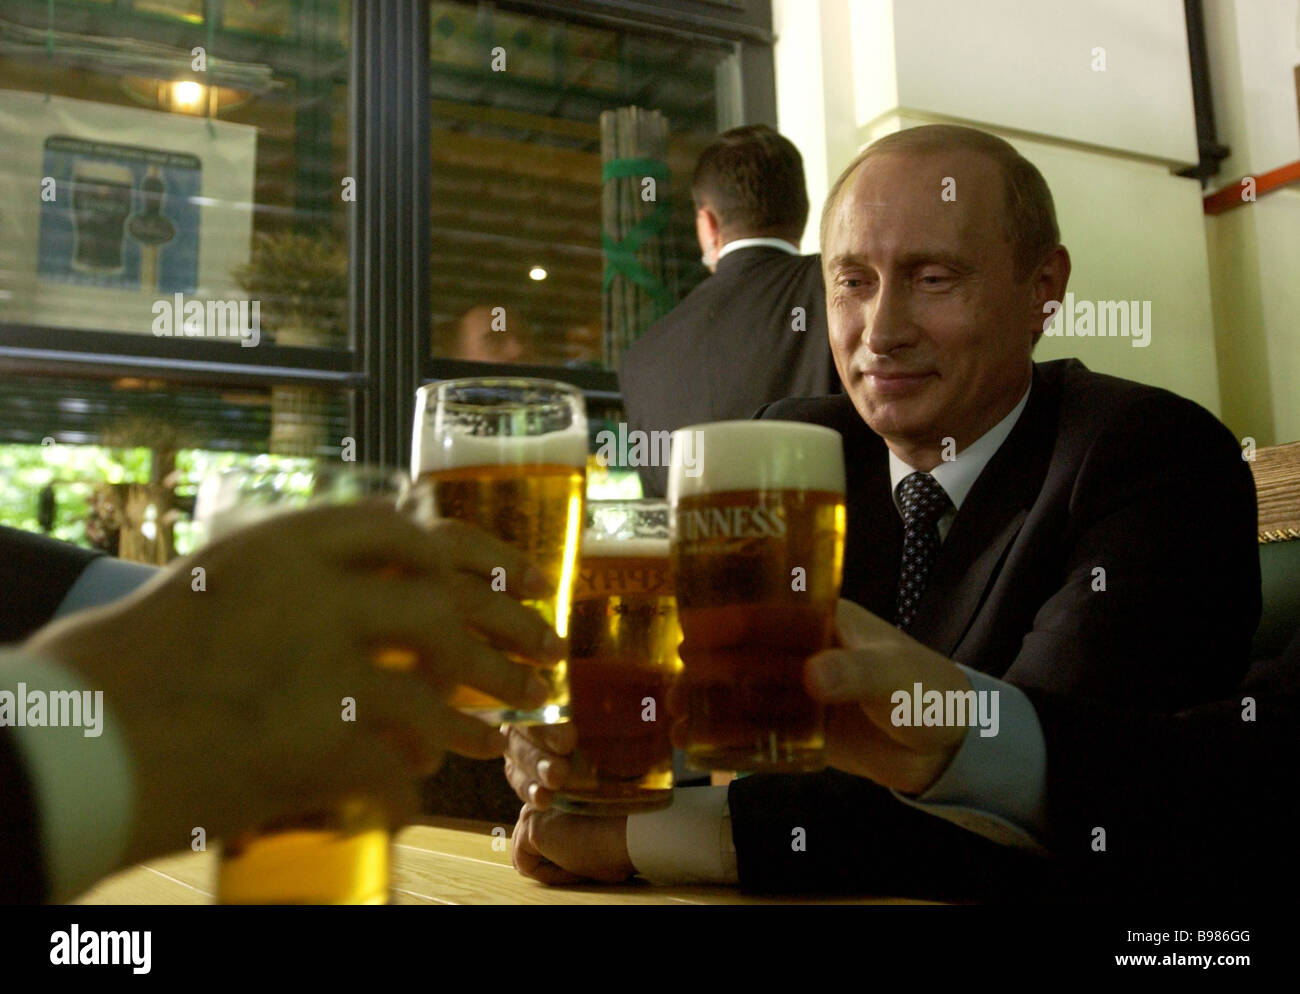 A working trip of the President of the Russian Federation Vladimir Putin to the Chelyabinsk Region Vladimir Putin drinking beer Stock Photo